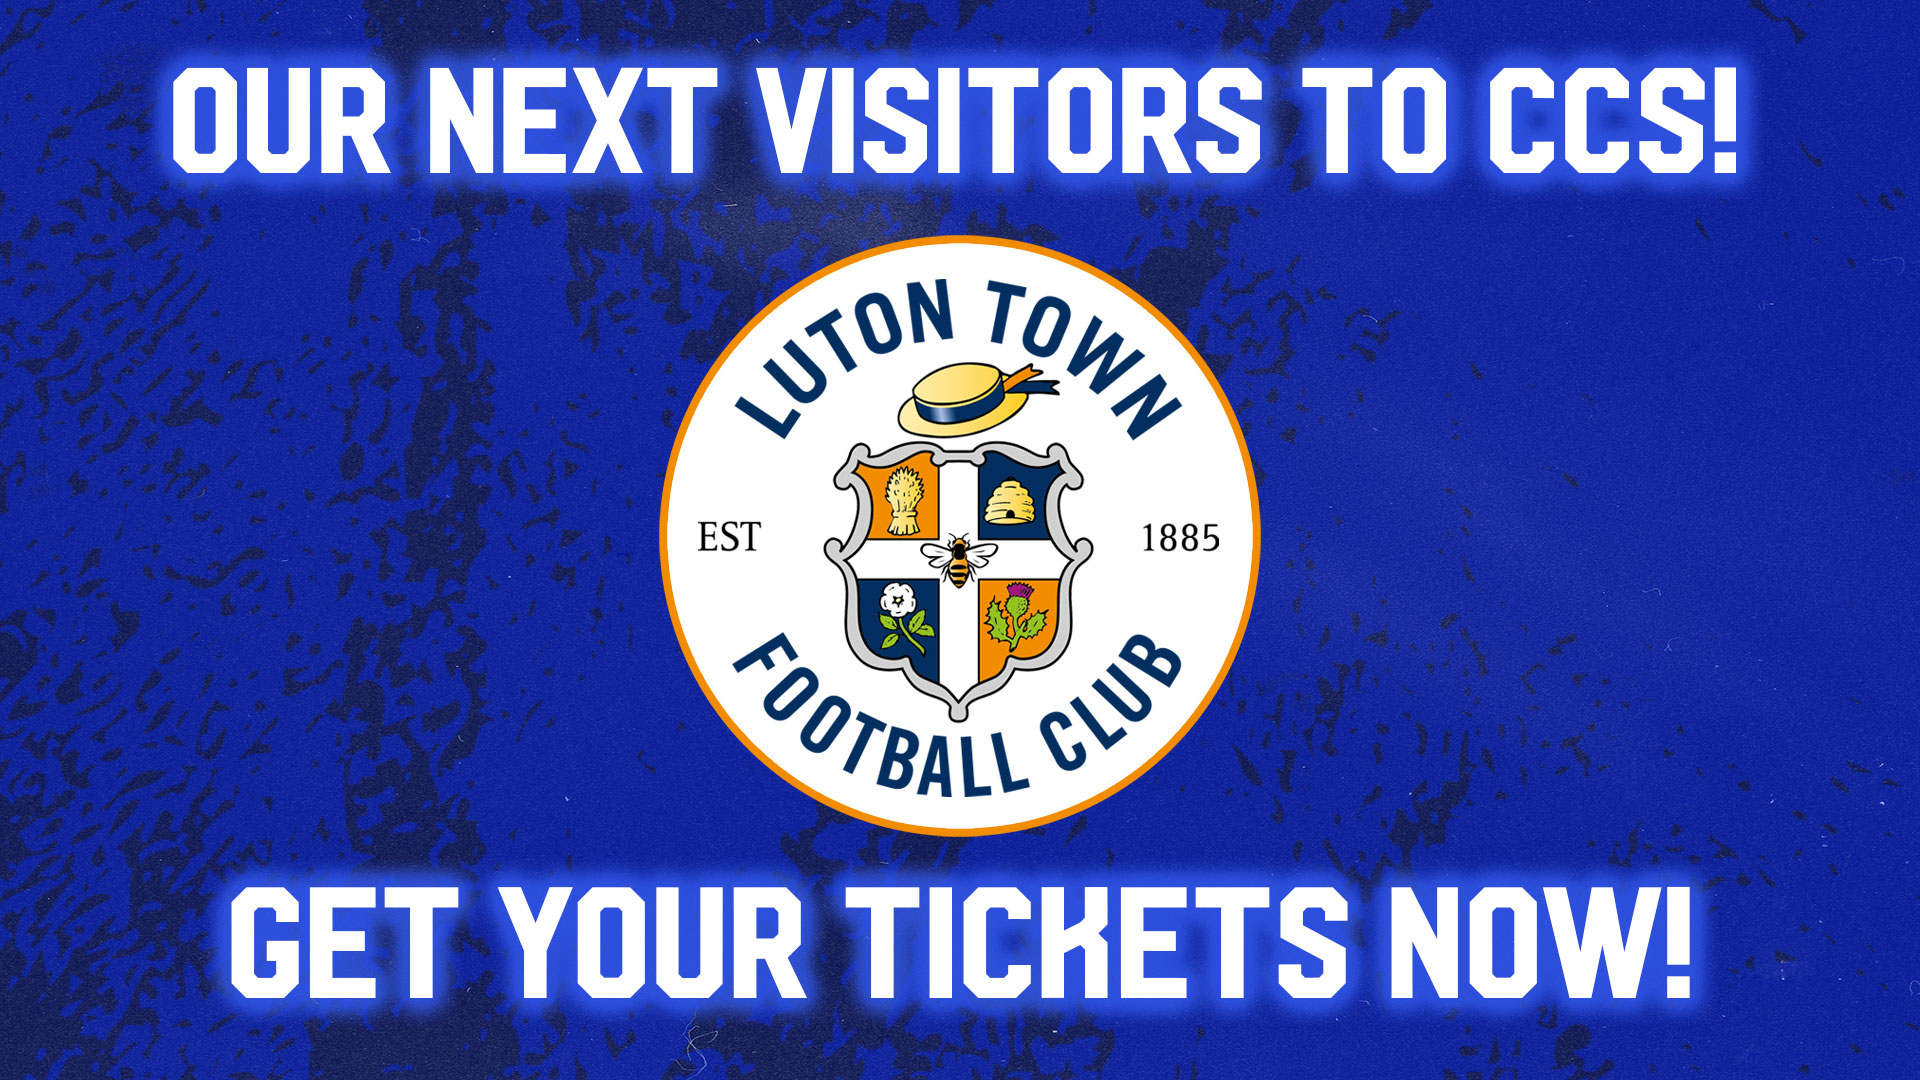 The Bluebirds host Luton Town this Tuesday night...